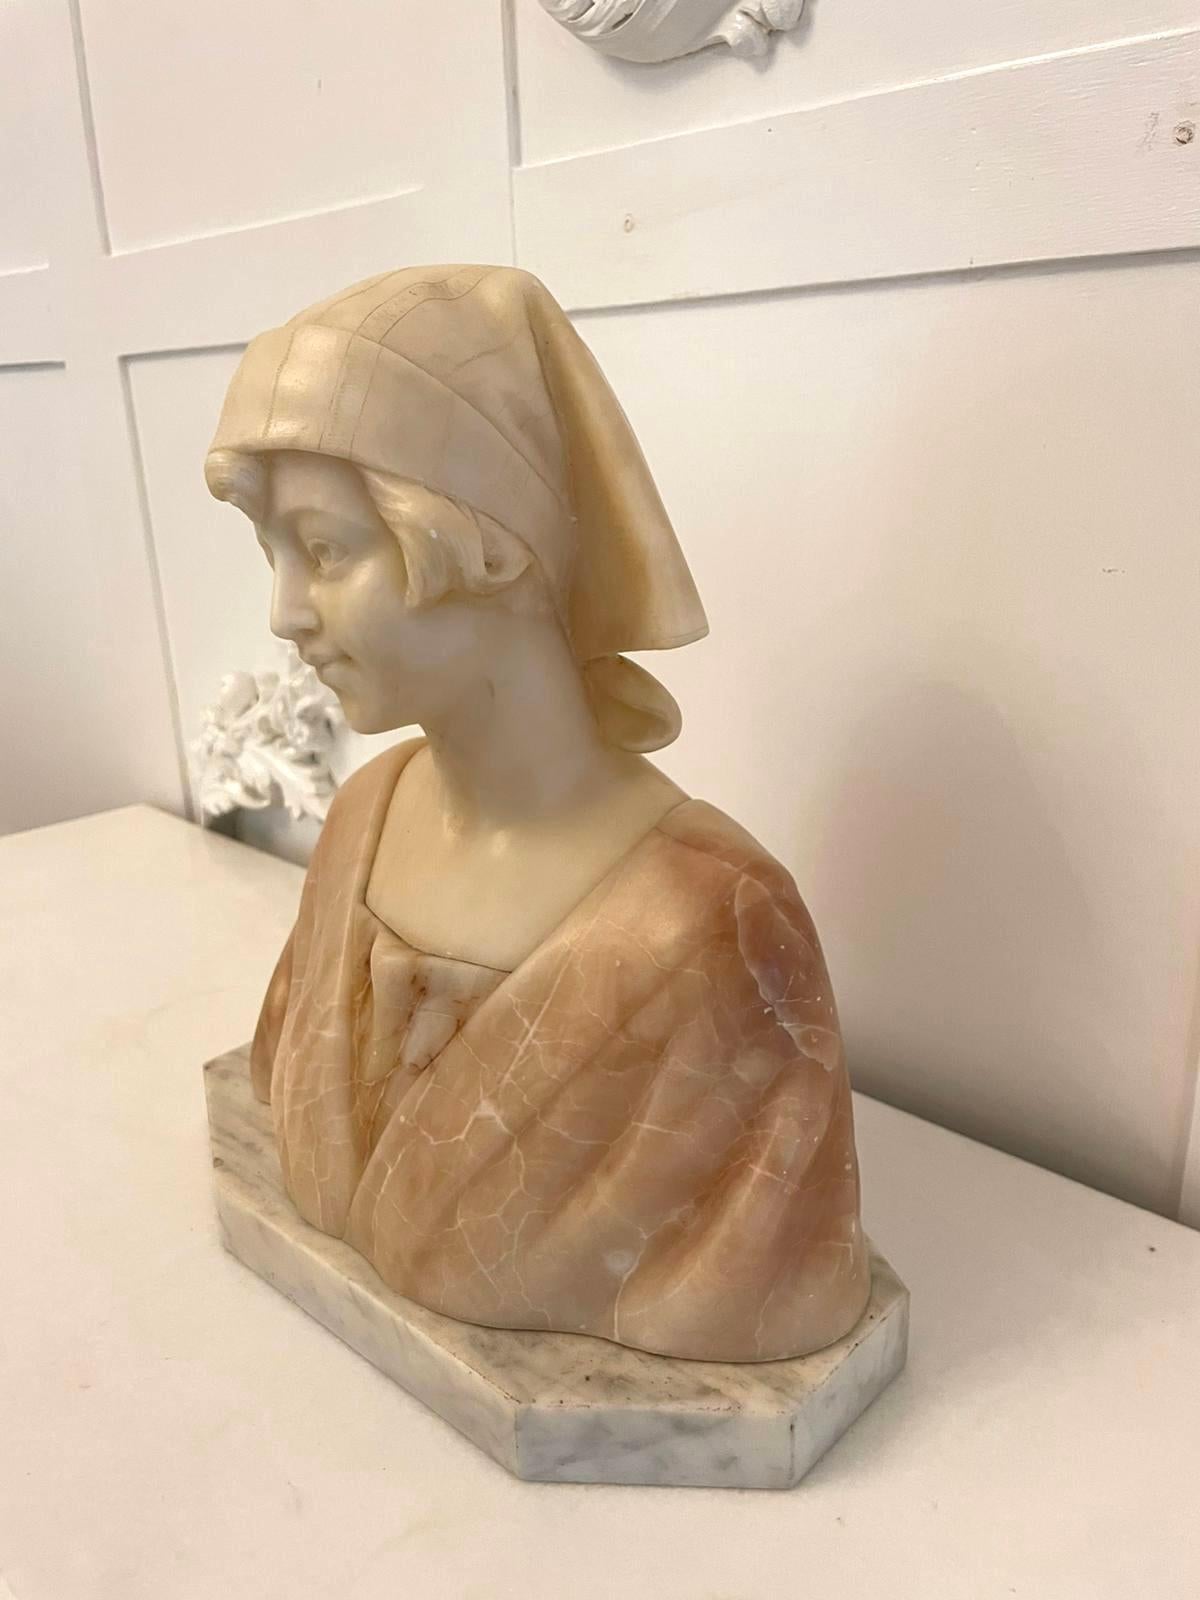 Superb quality antique Victorian alabaster bust of a young lady on the original marble base.

A charming decorative piece in lovely original condition.

Measures: H 32 x W 28.5 x D 16.5cm
Date 1860
 